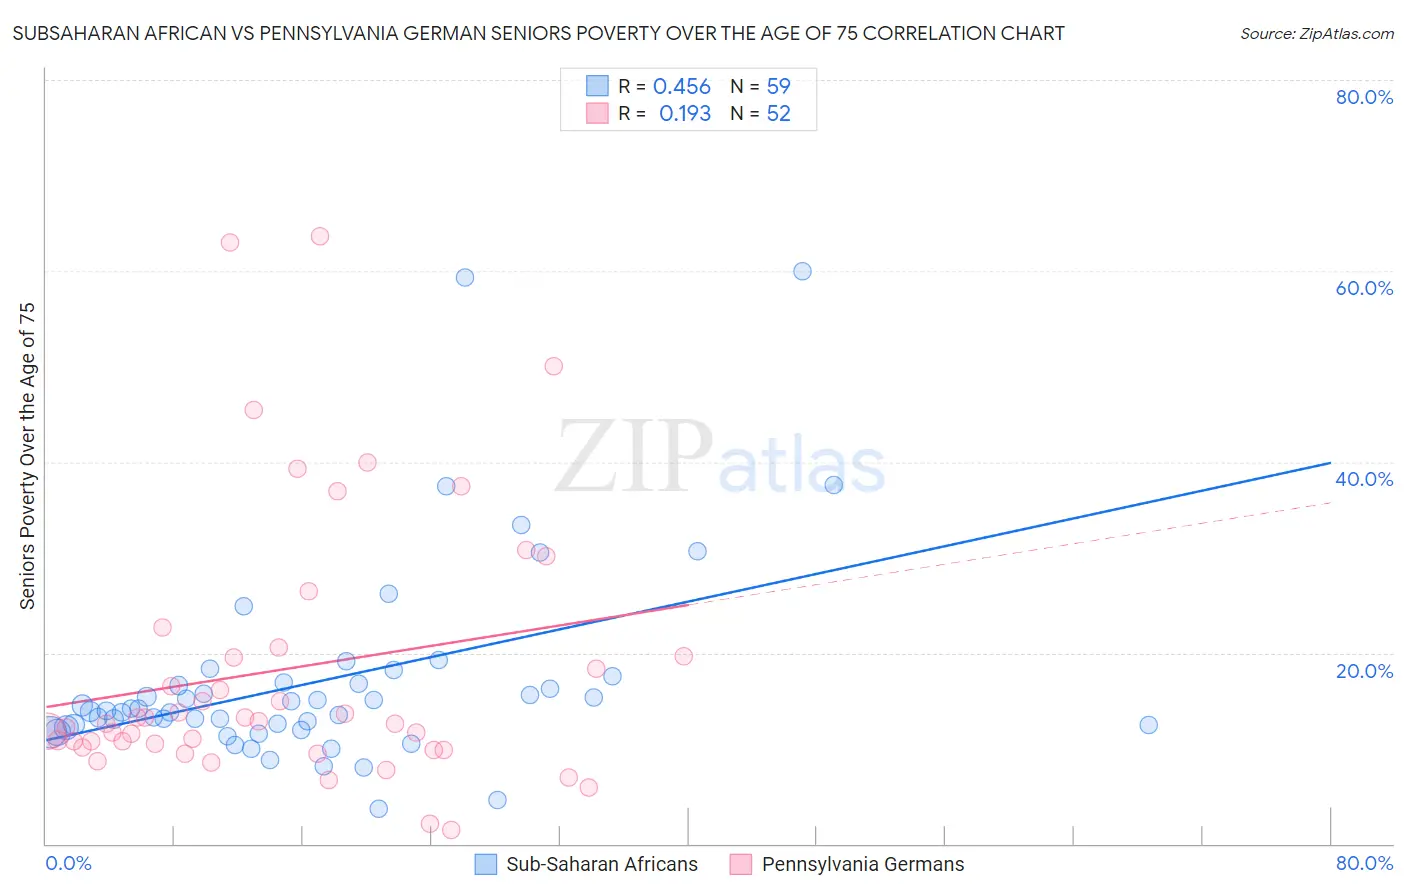 Subsaharan African vs Pennsylvania German Seniors Poverty Over the Age of 75